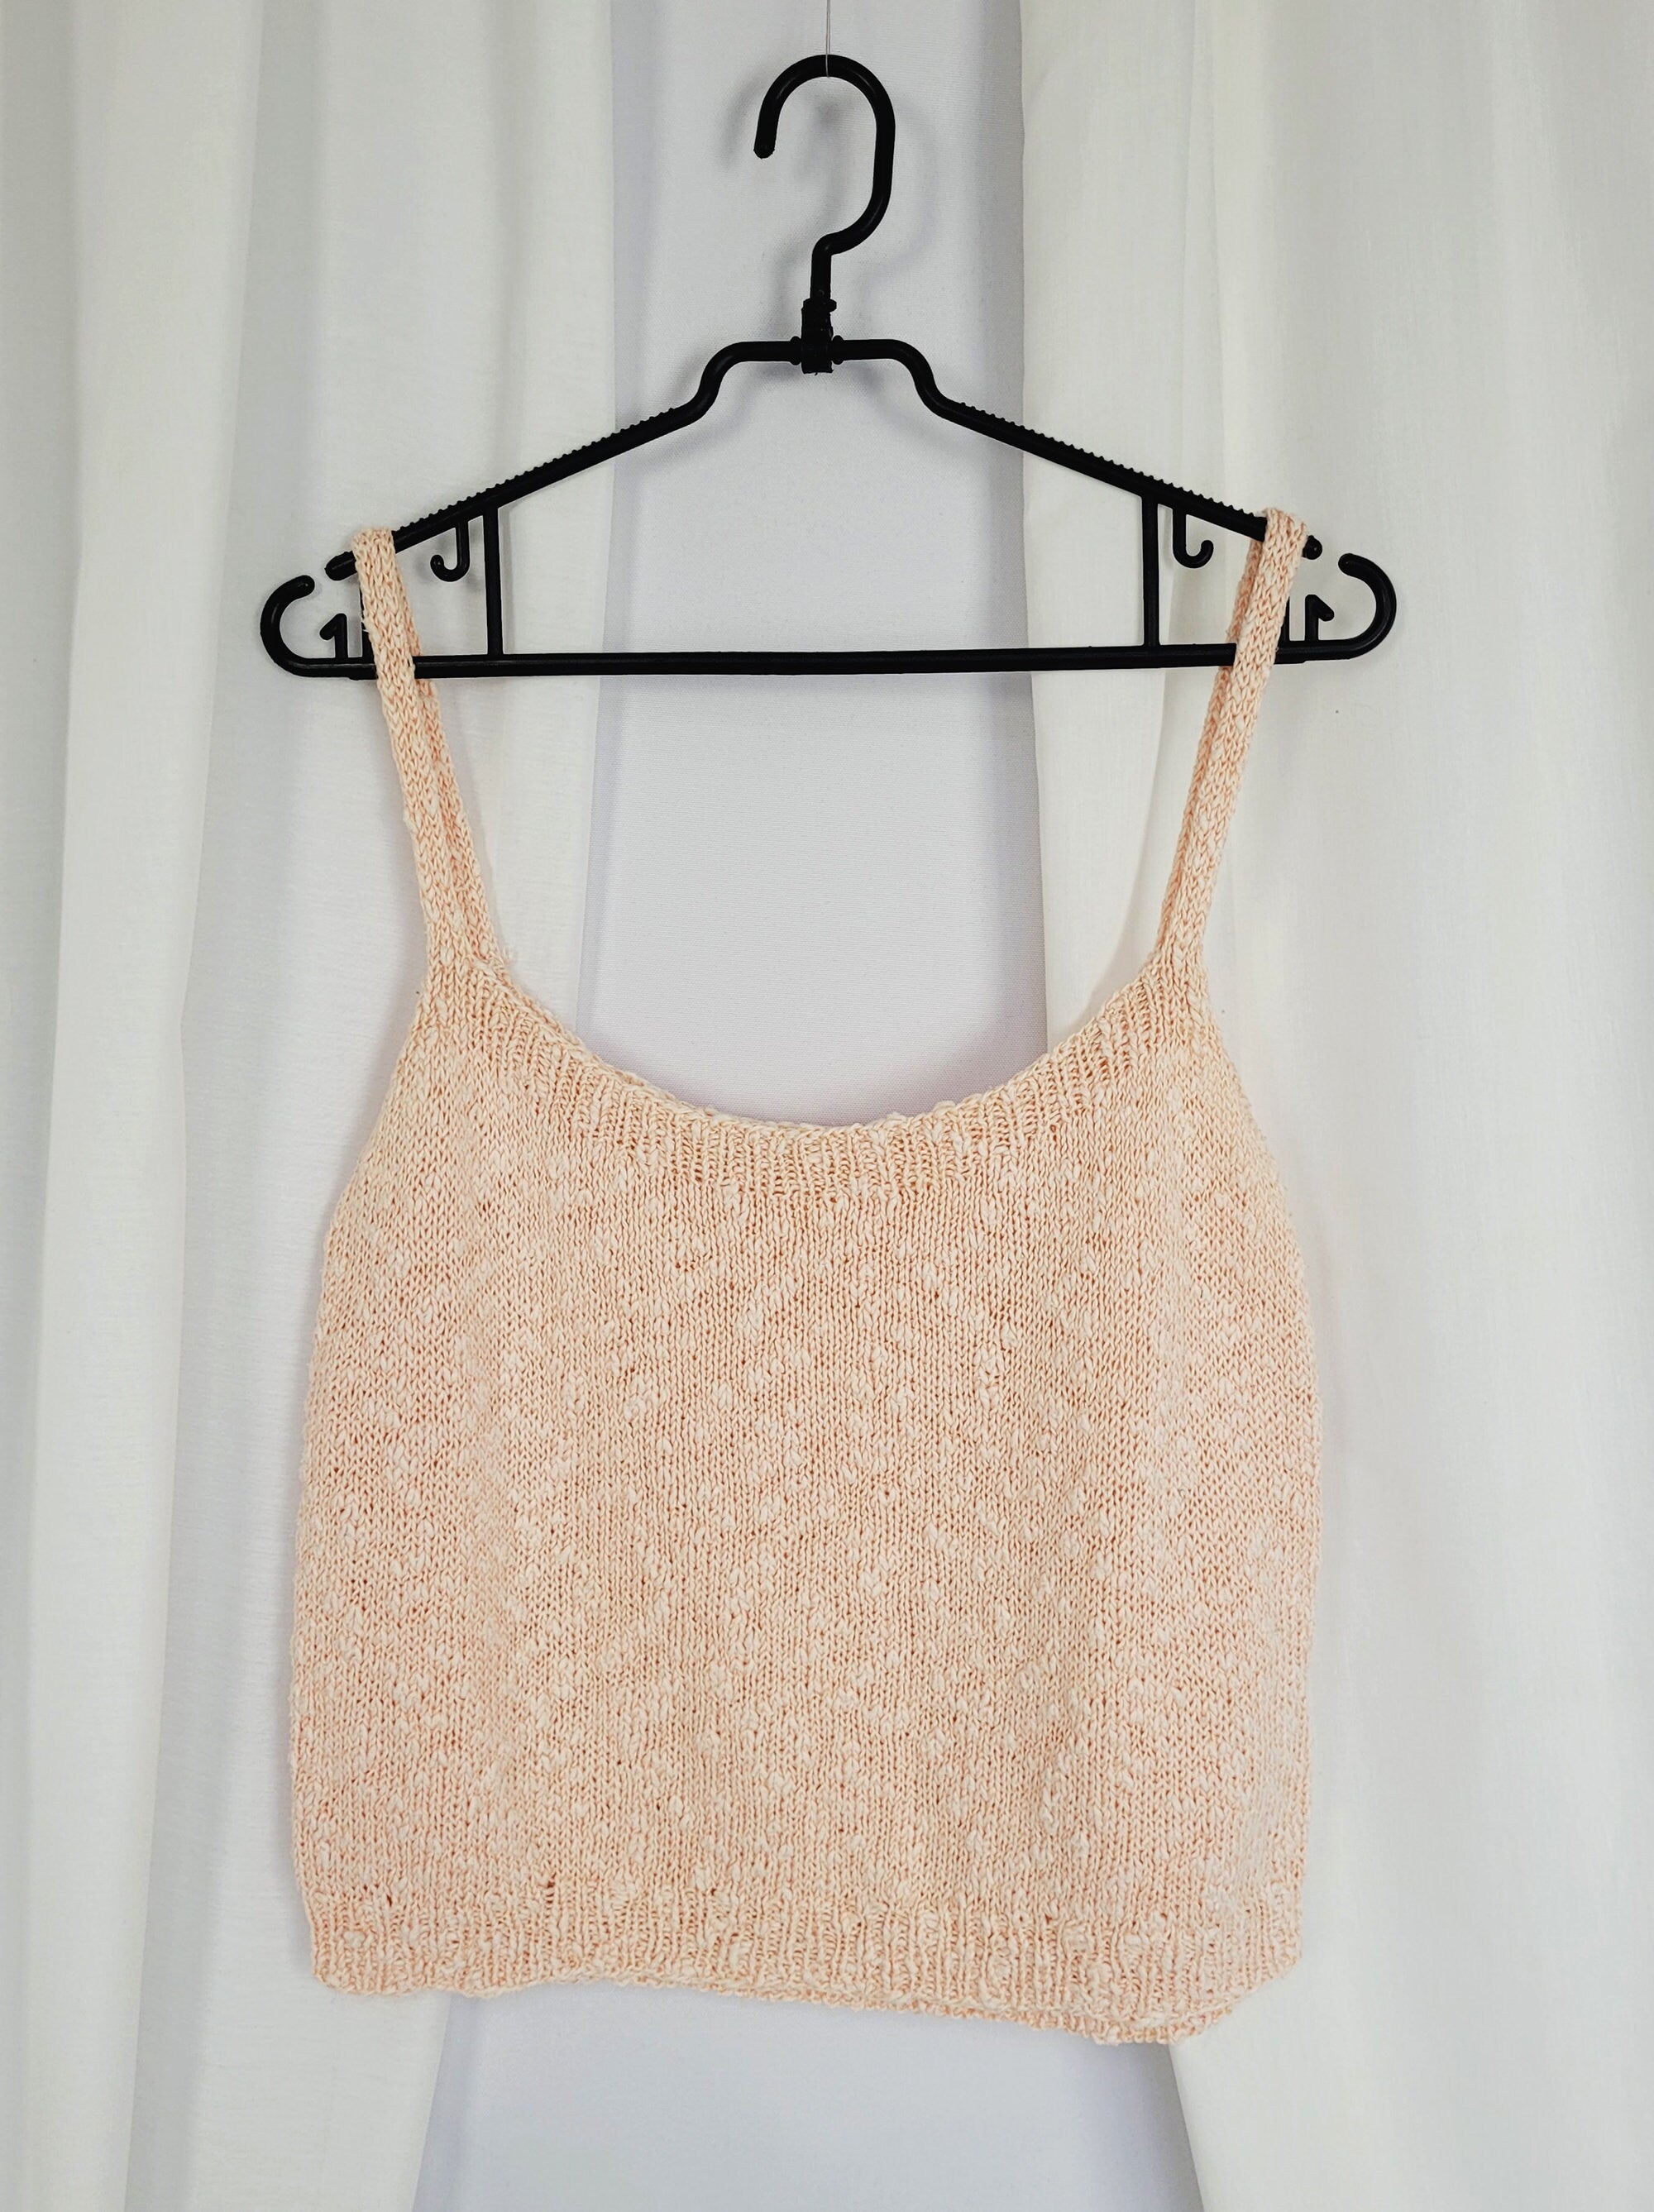 90s retro minimalist handmade cable knitted pastel pink top